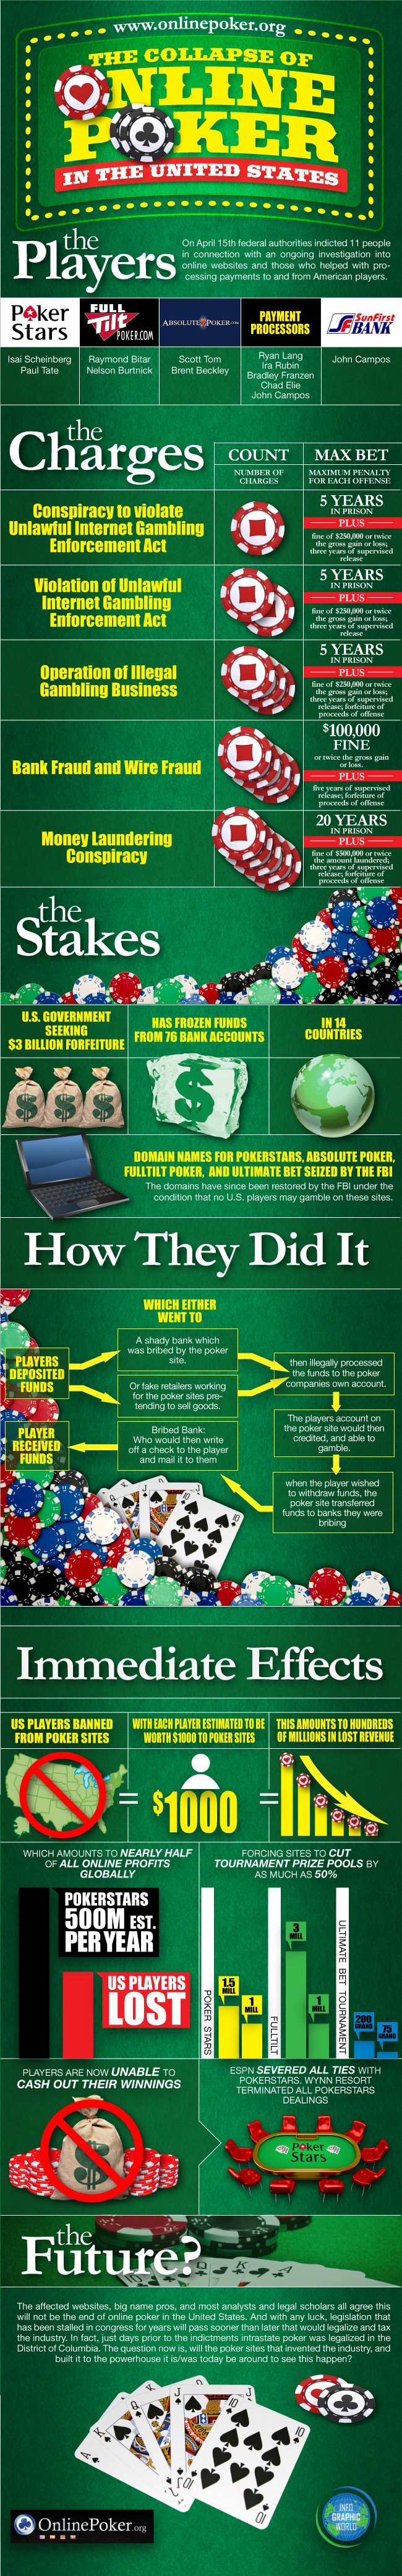 The Collapse of Online Poker inthe US [Infographic]